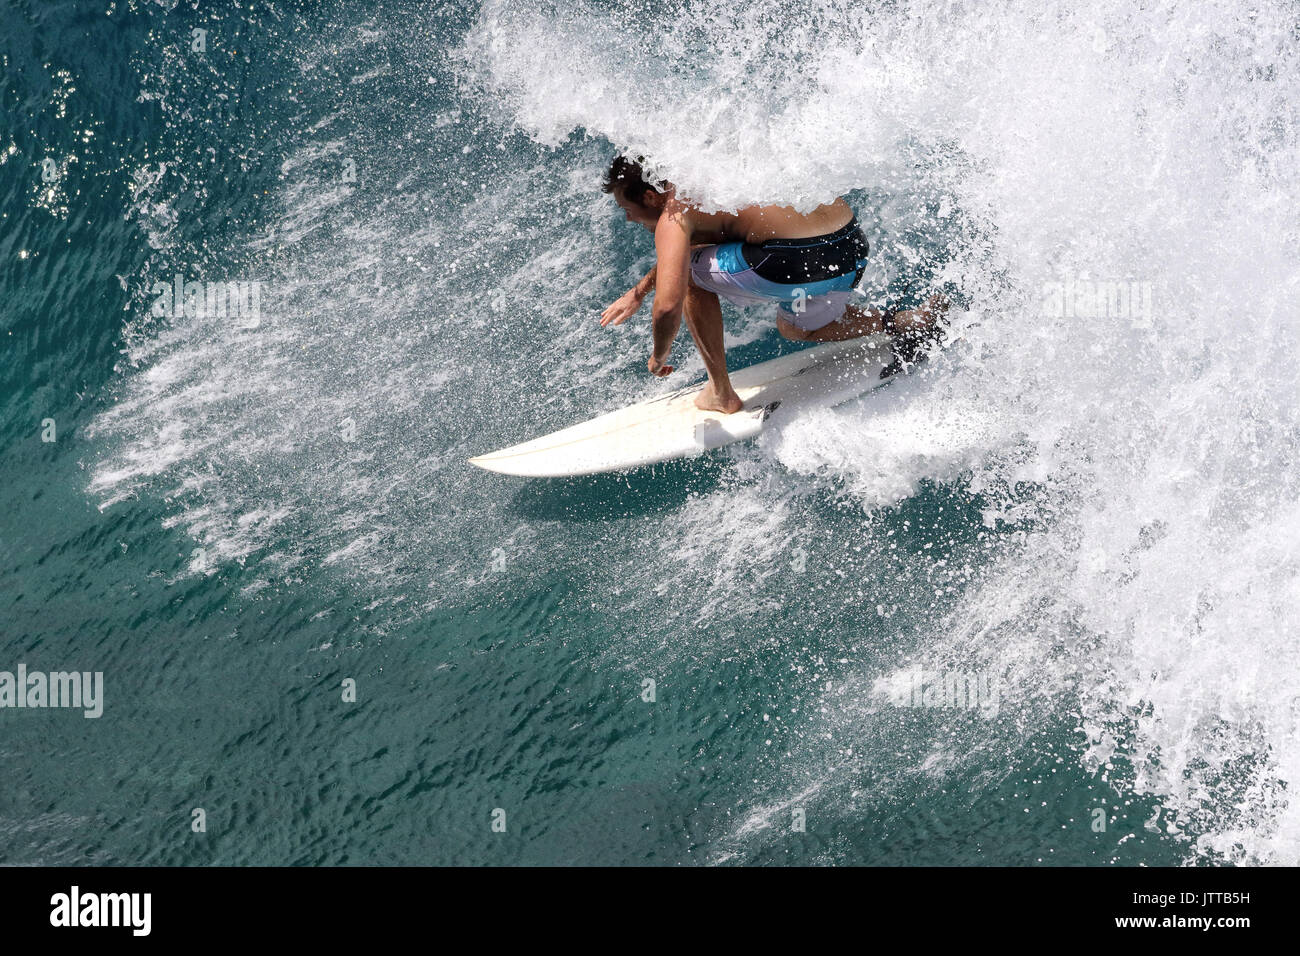 Unrecognizable surfer in the tube of a maui wave. Stock Photo